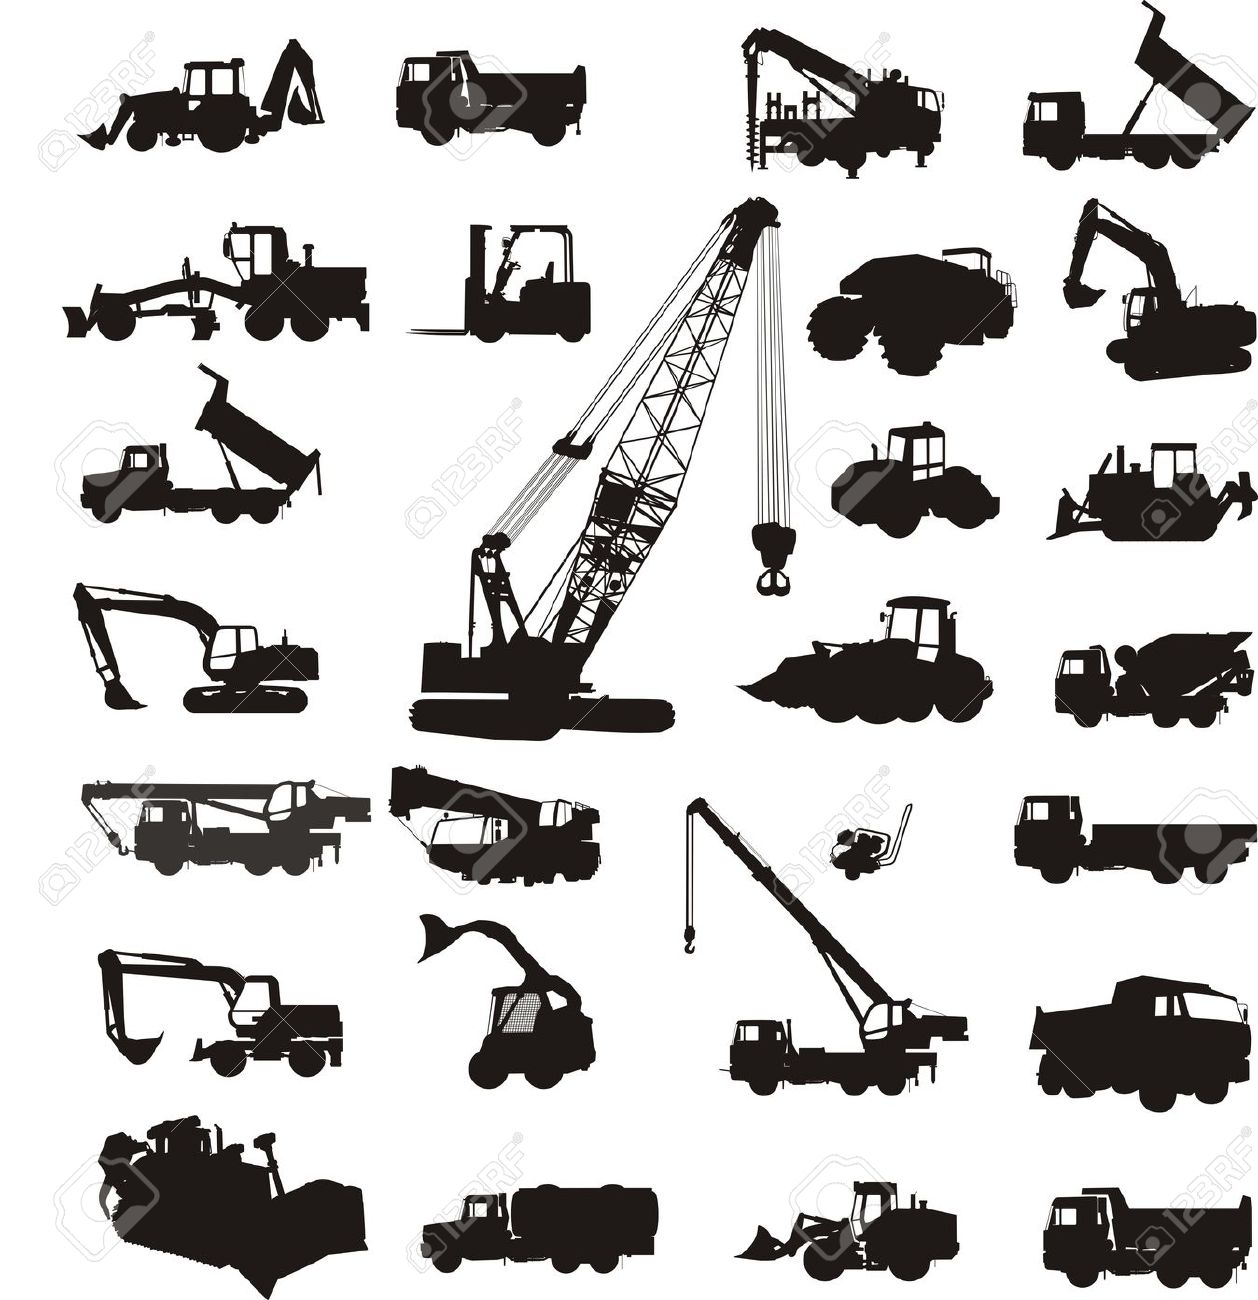 Construction equipment clipart black and white 